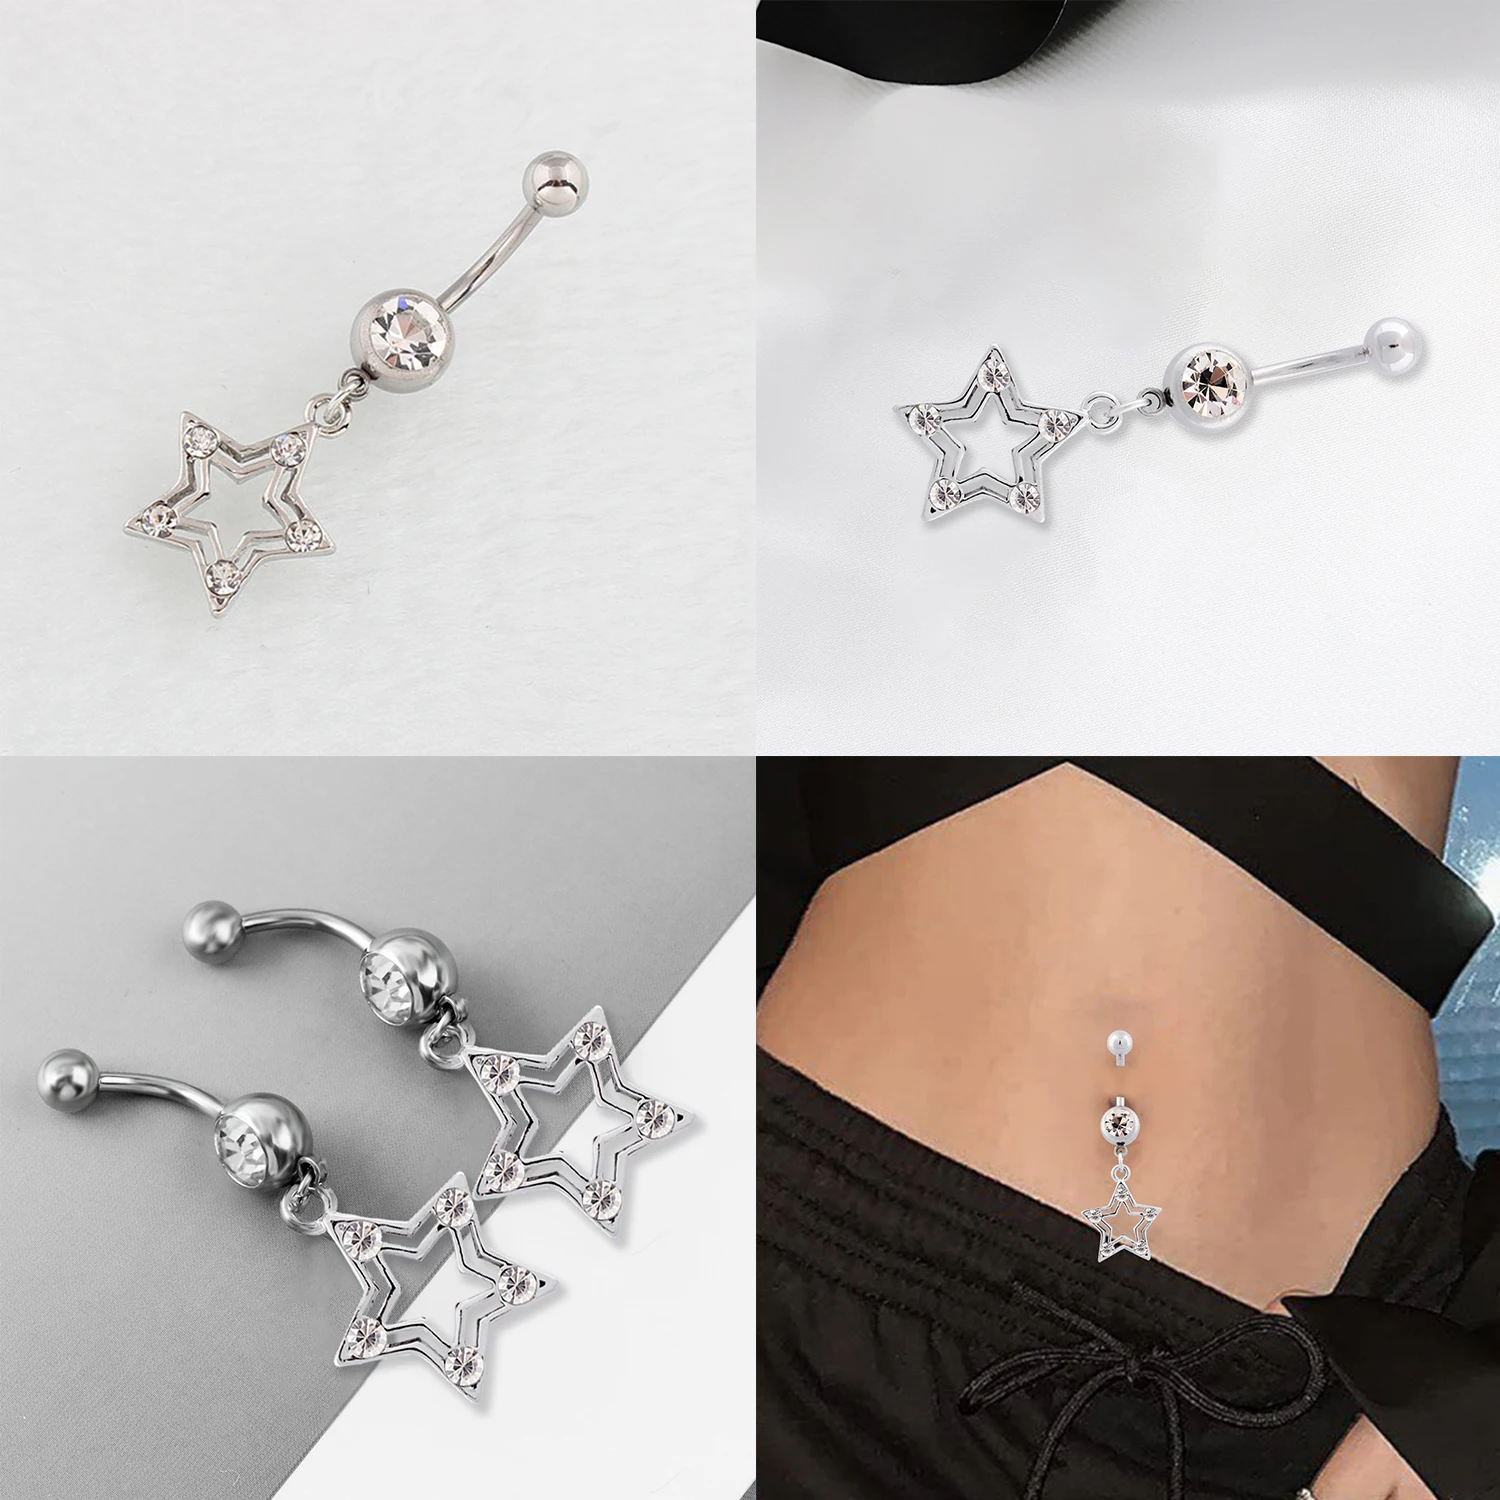 

1PC New Hollow Star Belly Button Rings Long Dangled Bar Stainless Steel Belly Piercing Ring Shinny Crystal Charming Body Jewelry